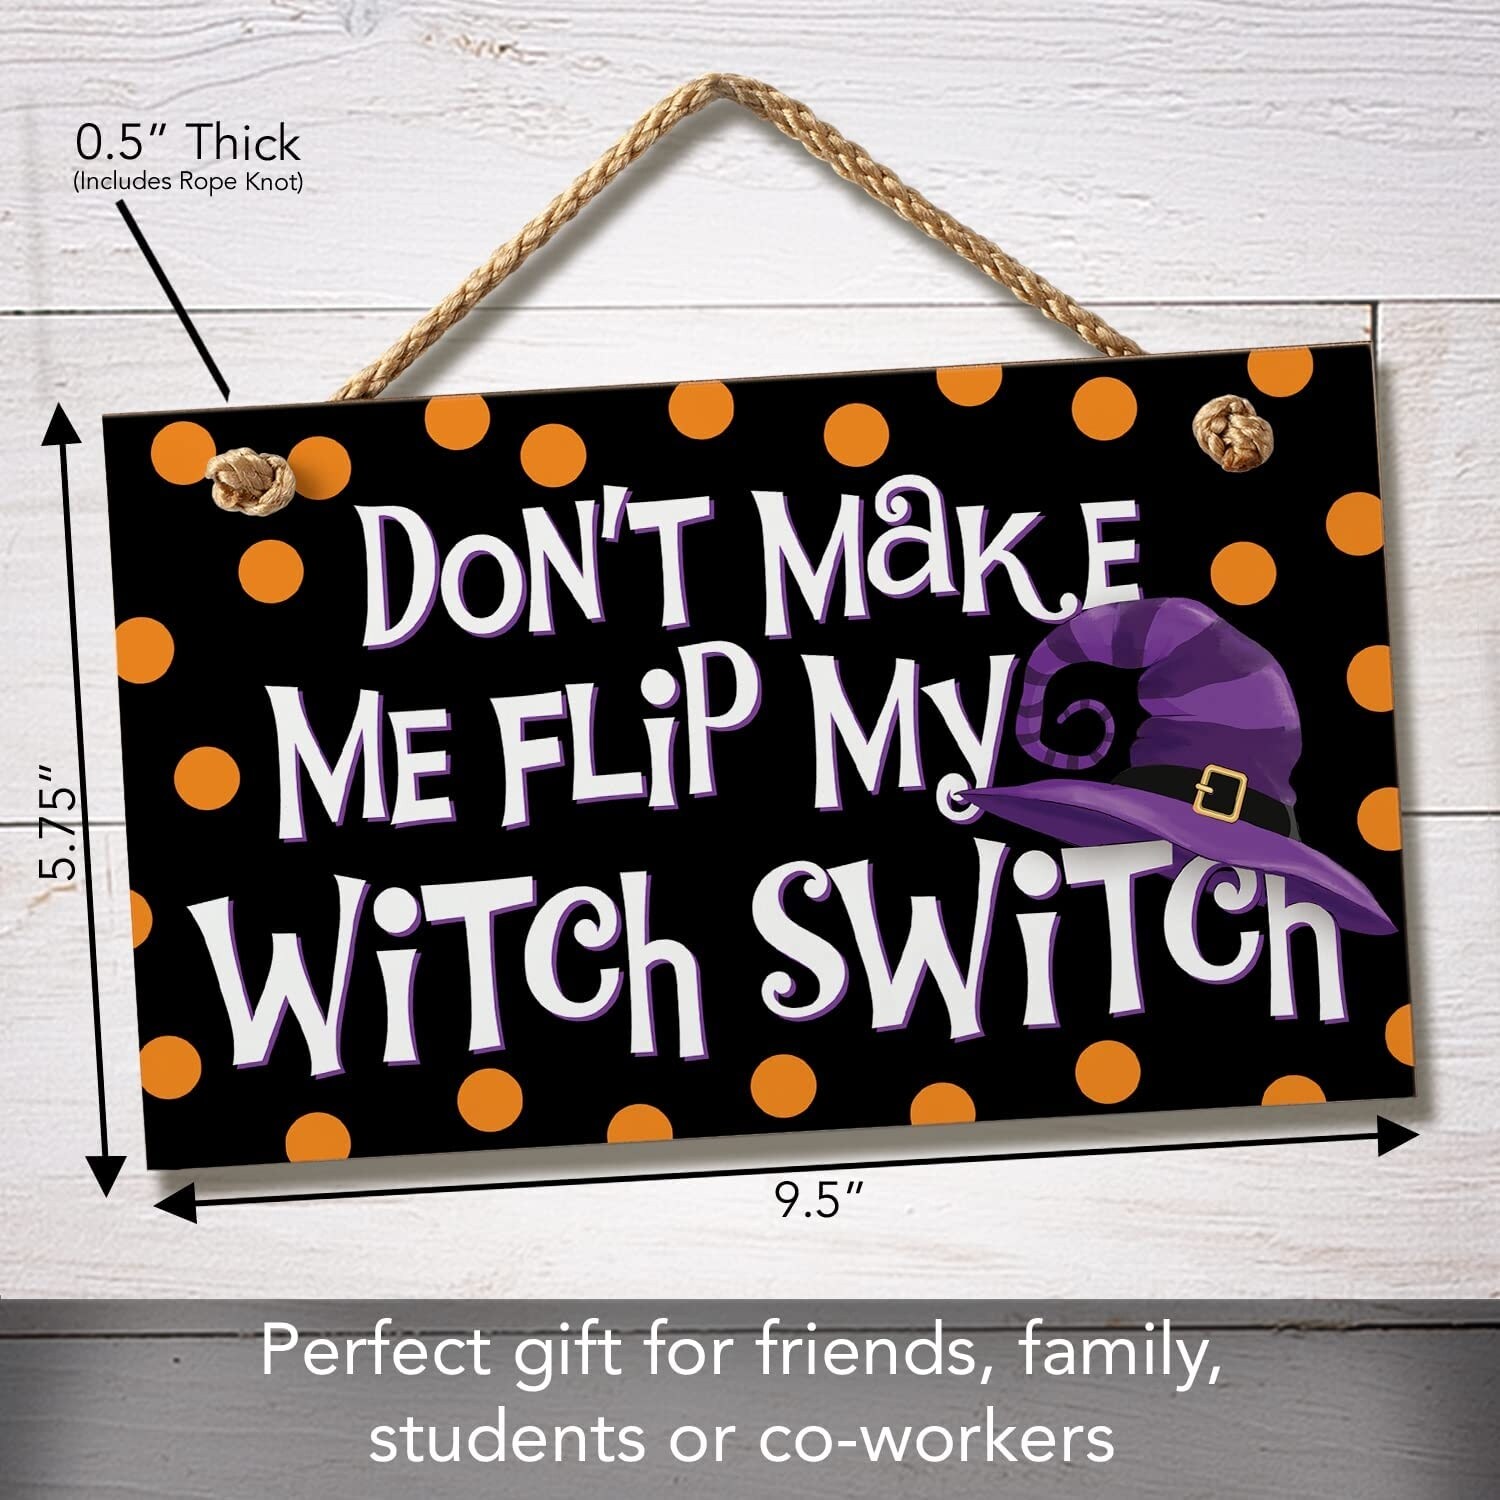 "Don't Make Me Flip My Witch Switch" Decorative Hanging Wood Sign 9.5" by 5.75" Made in the USA - multi